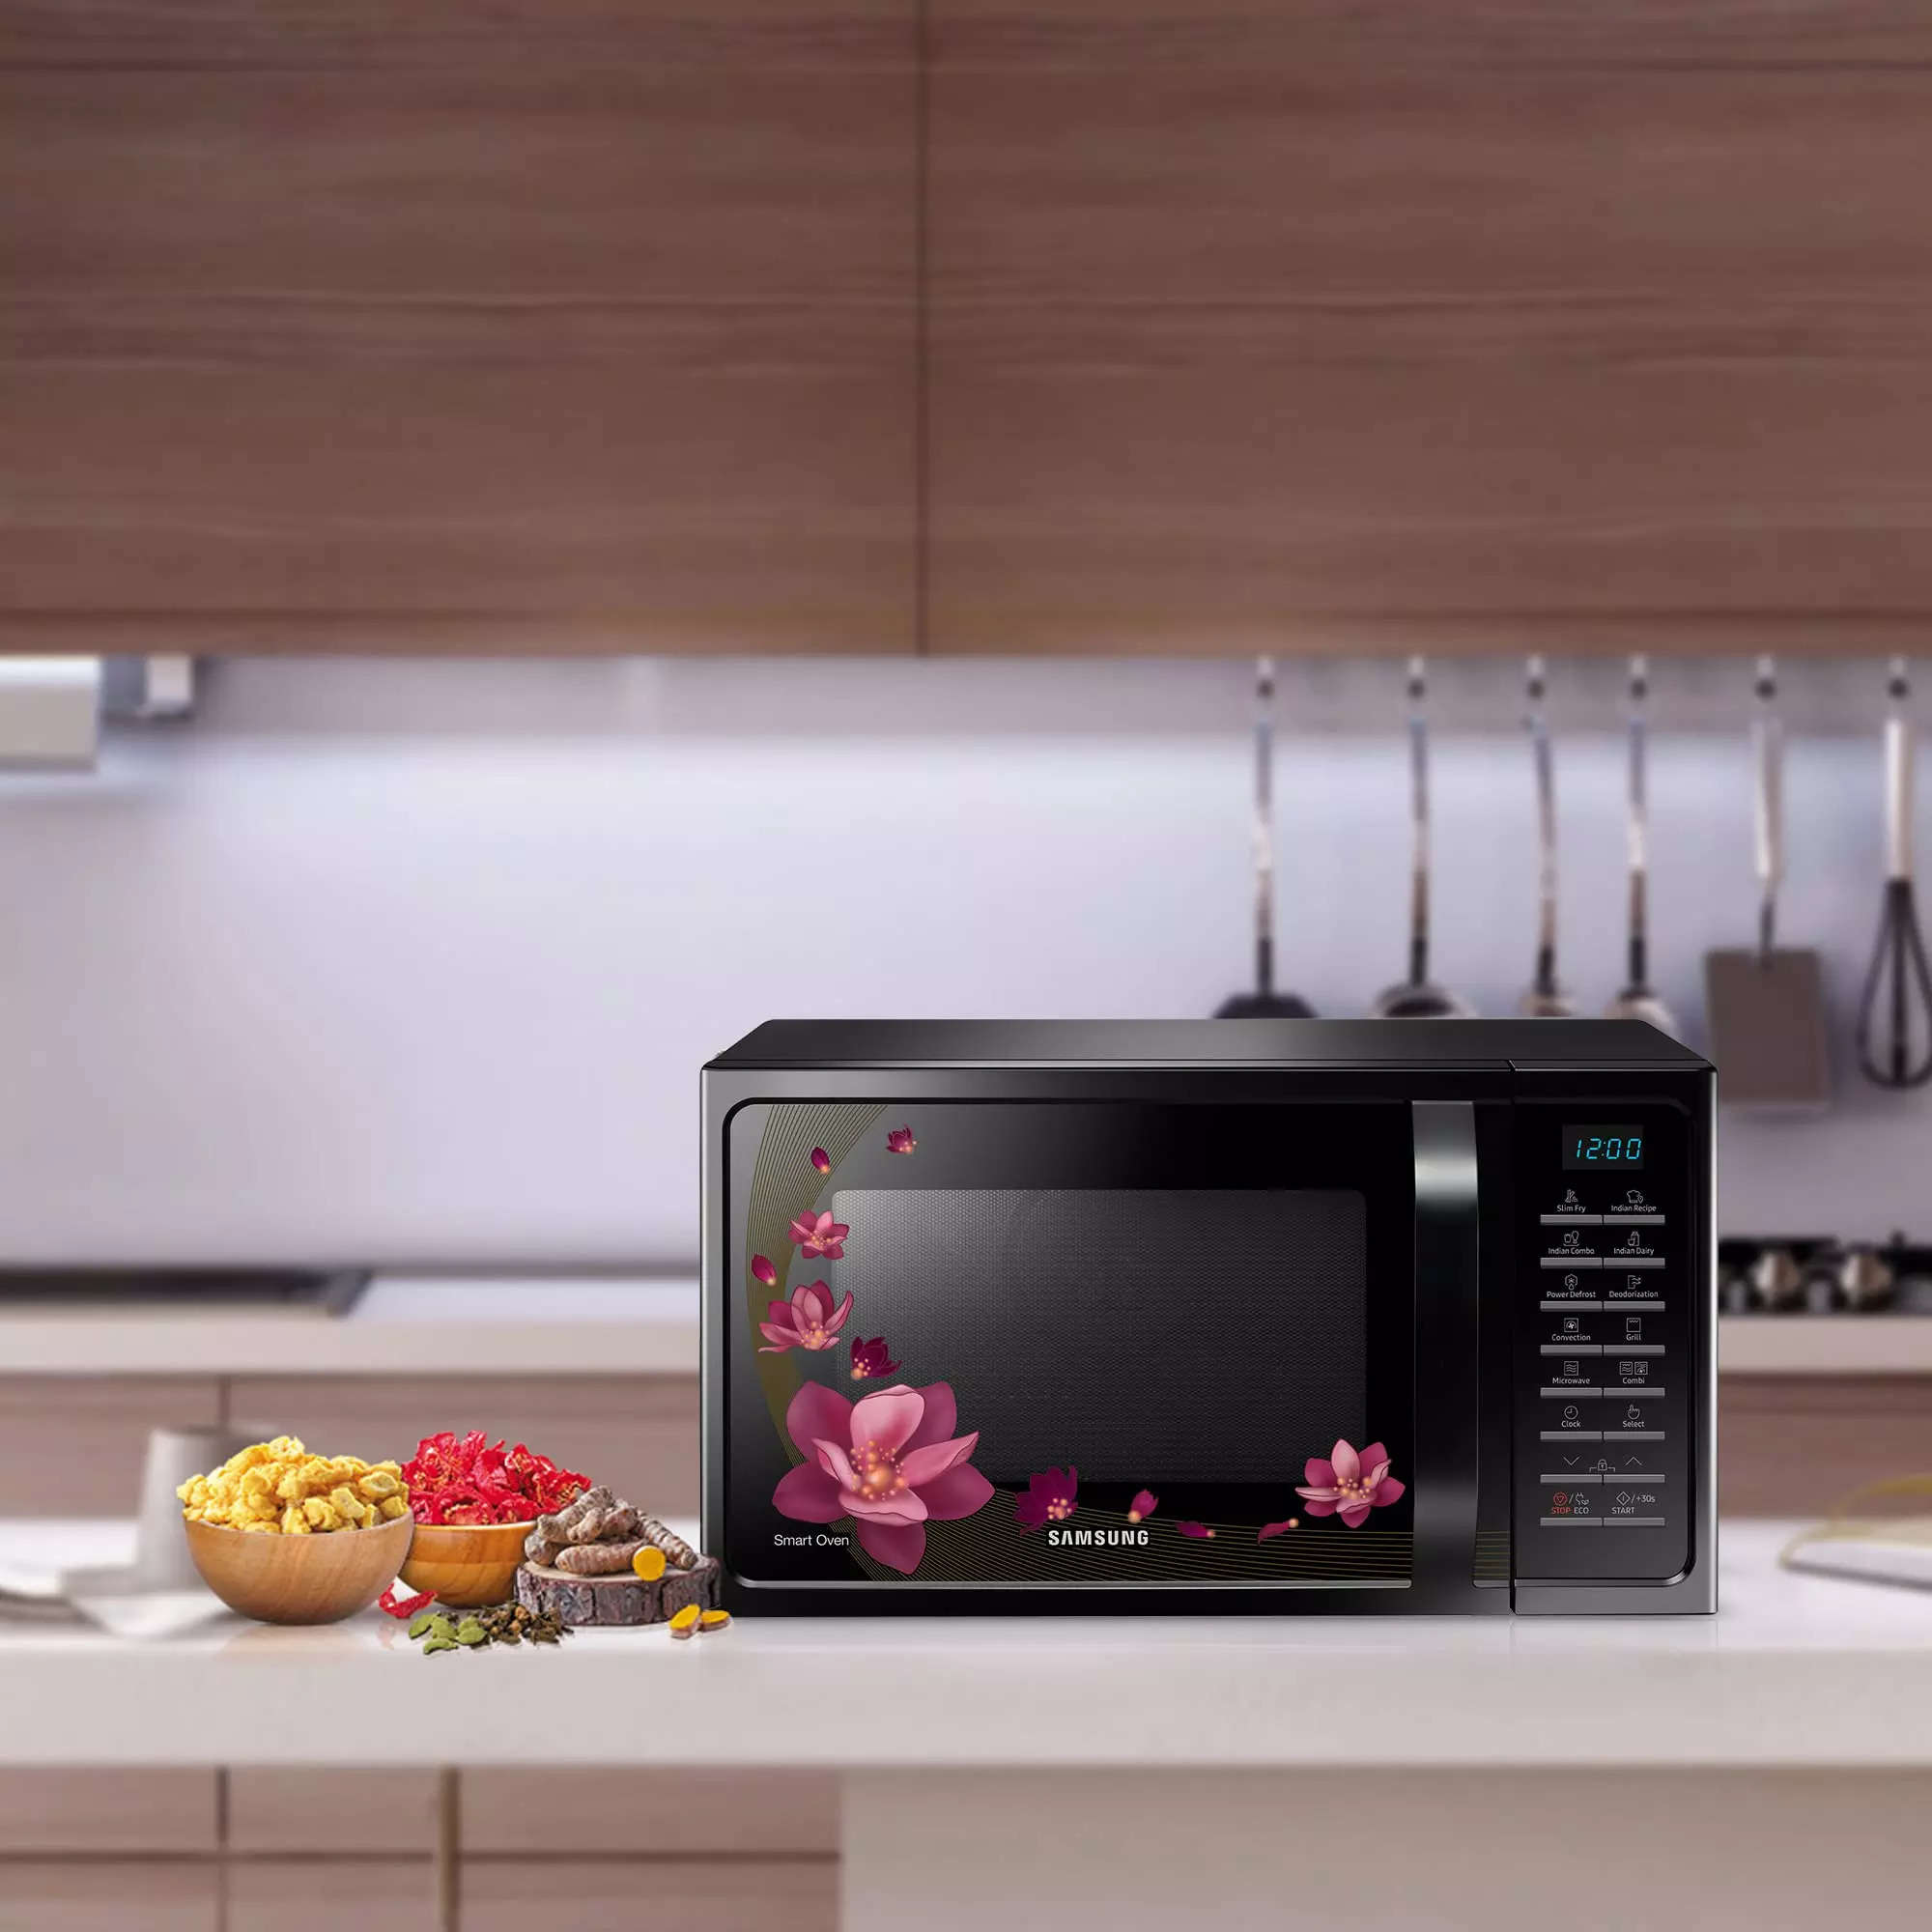 How To Fix The Error Code E-83 For Samsung Microwave